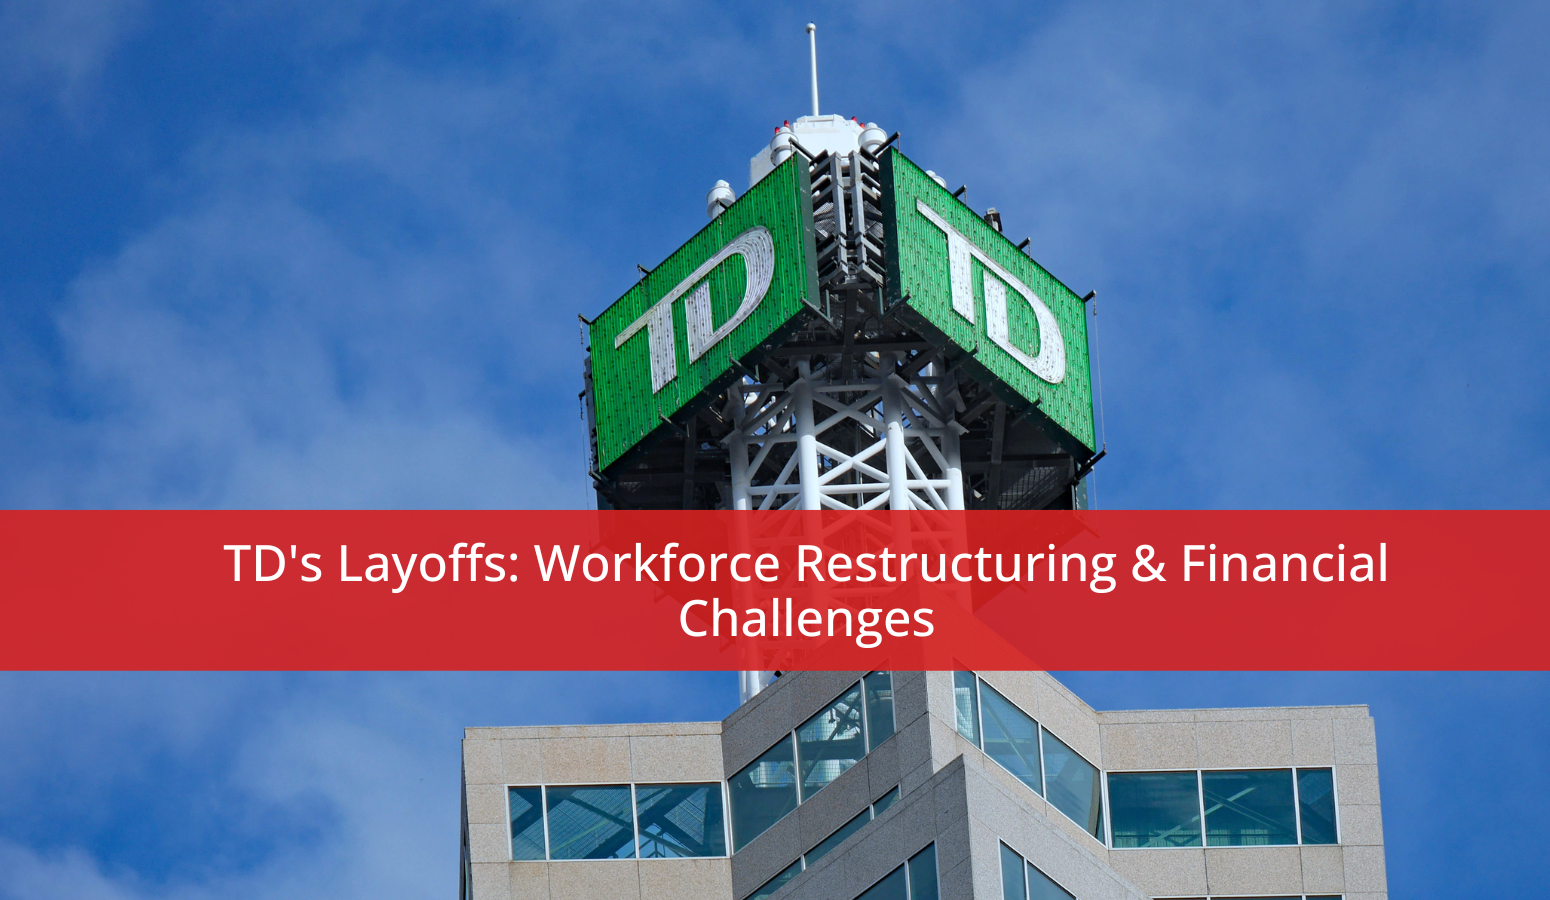 Featured image for “TD’s Layoffs: Workforce Restructuring & Financial Challenges”